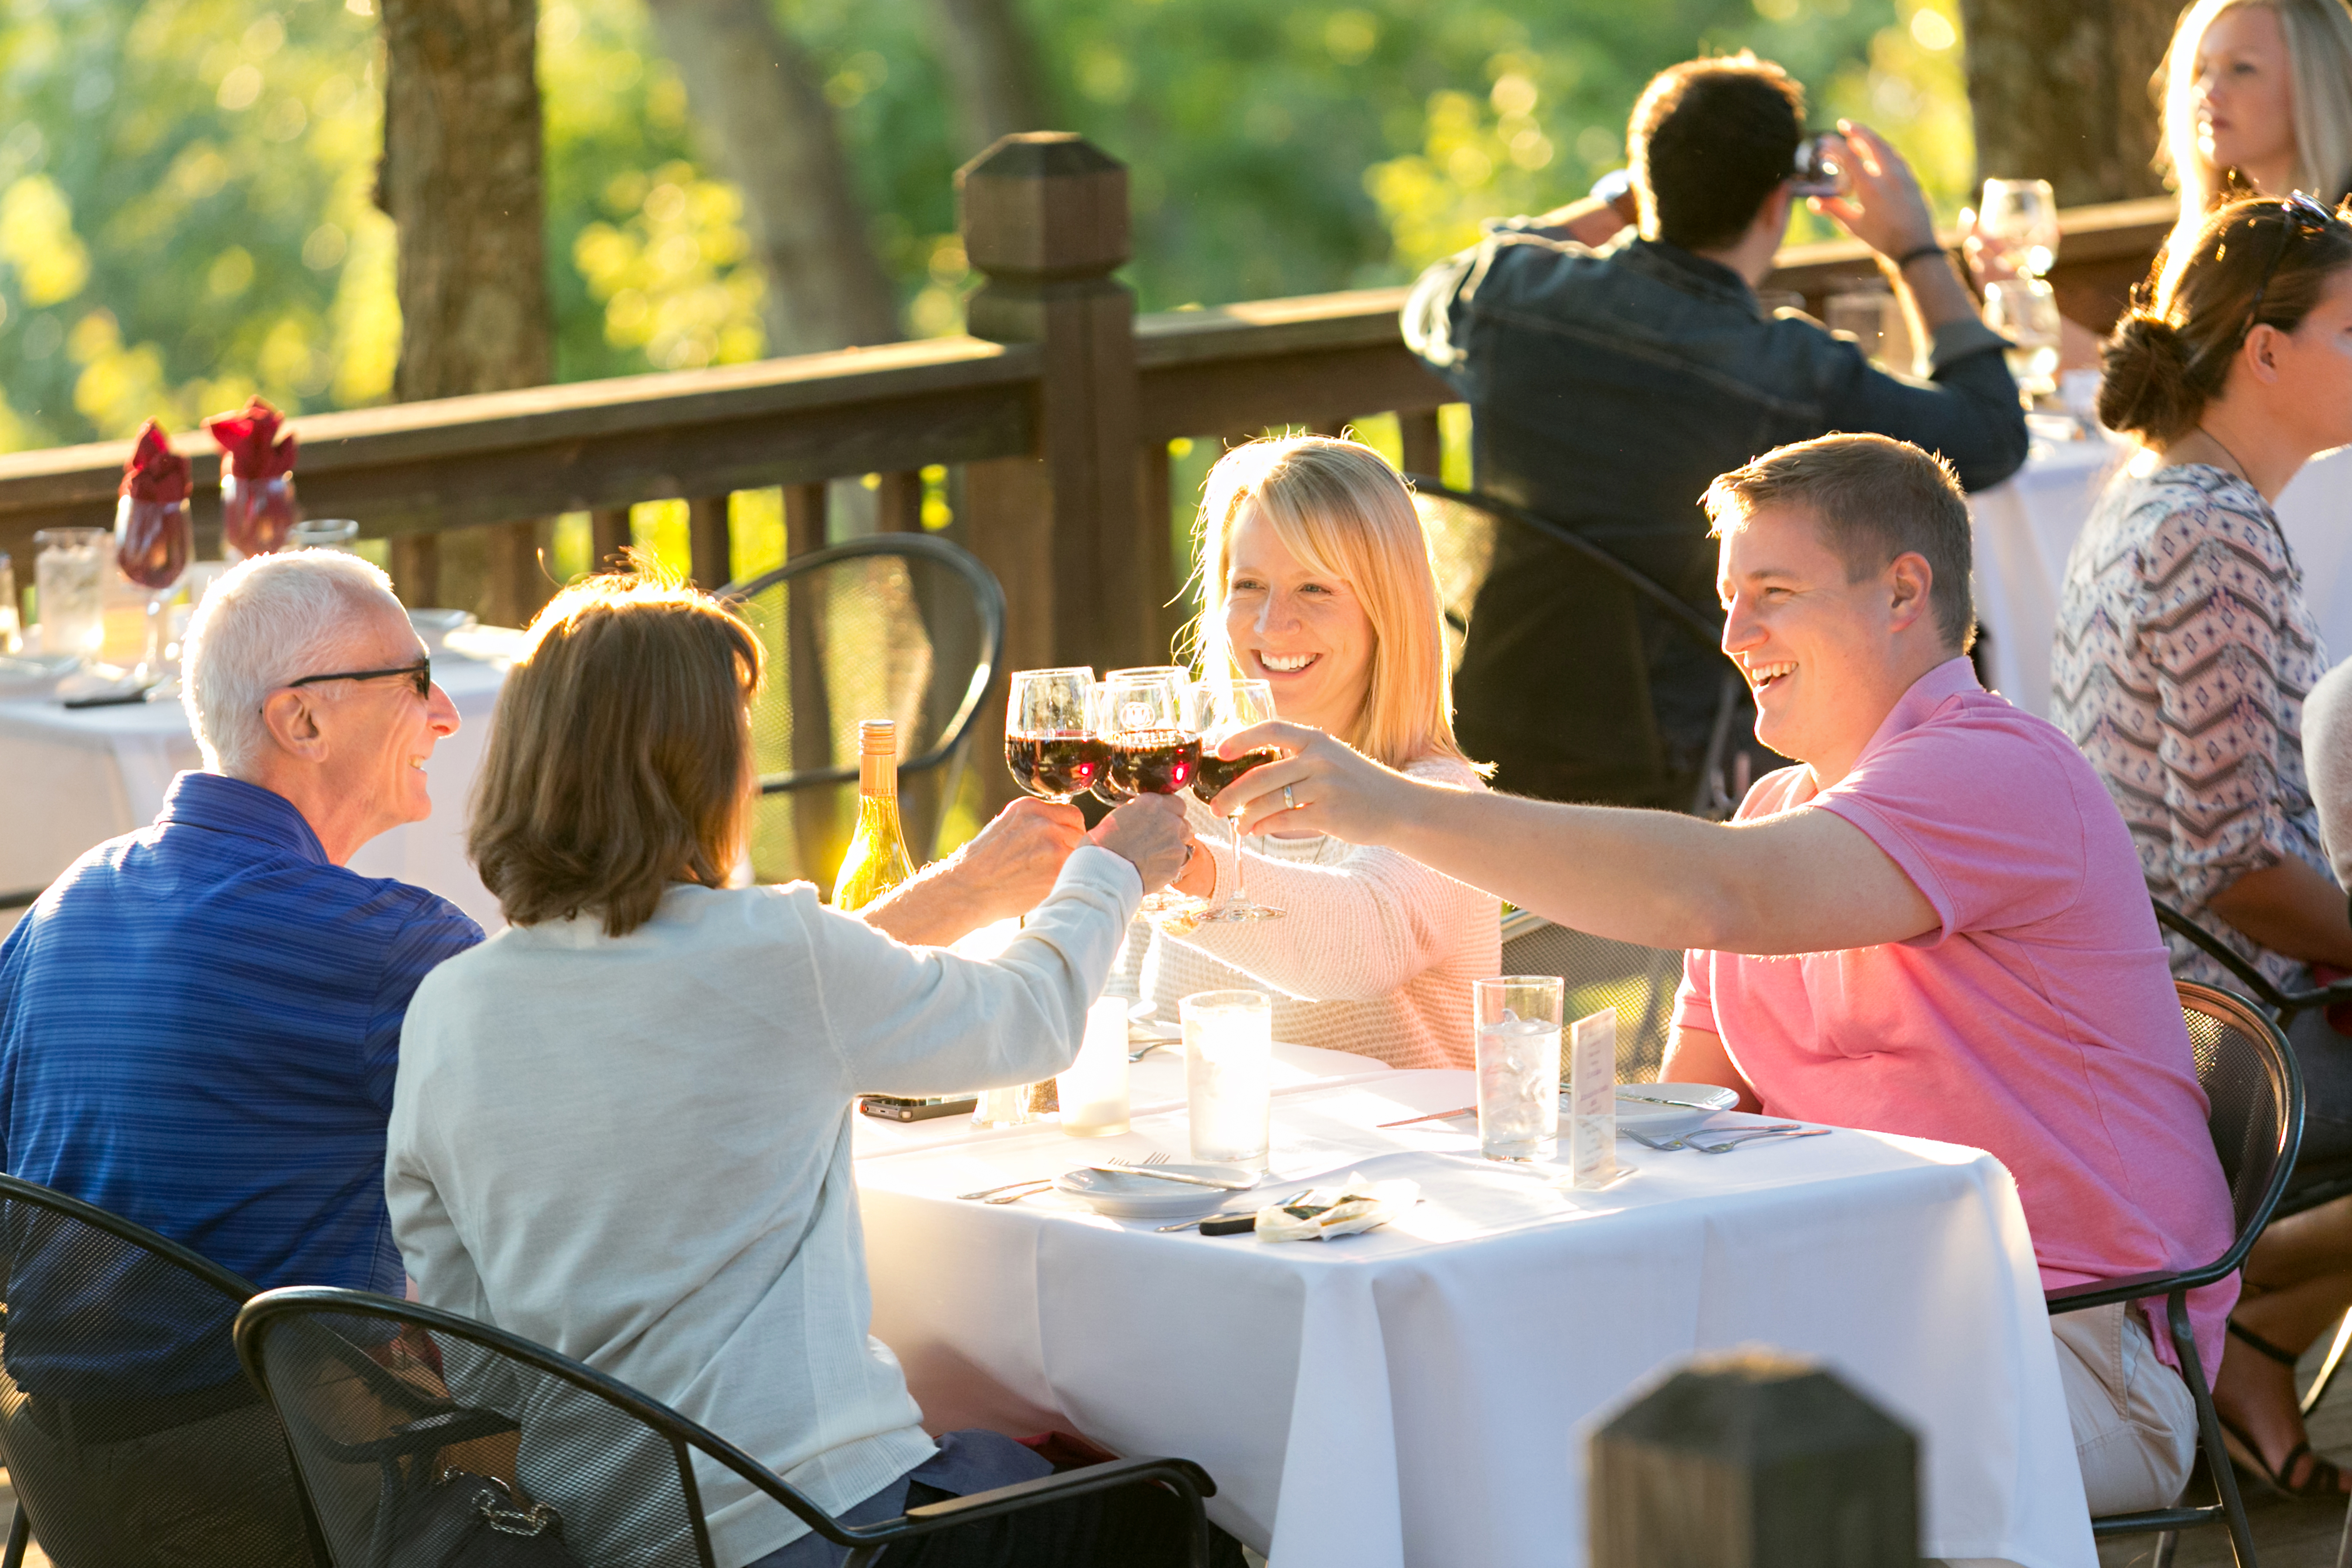 The Ultimate Father's Day Gift - Experiences in Missouri Wine Country